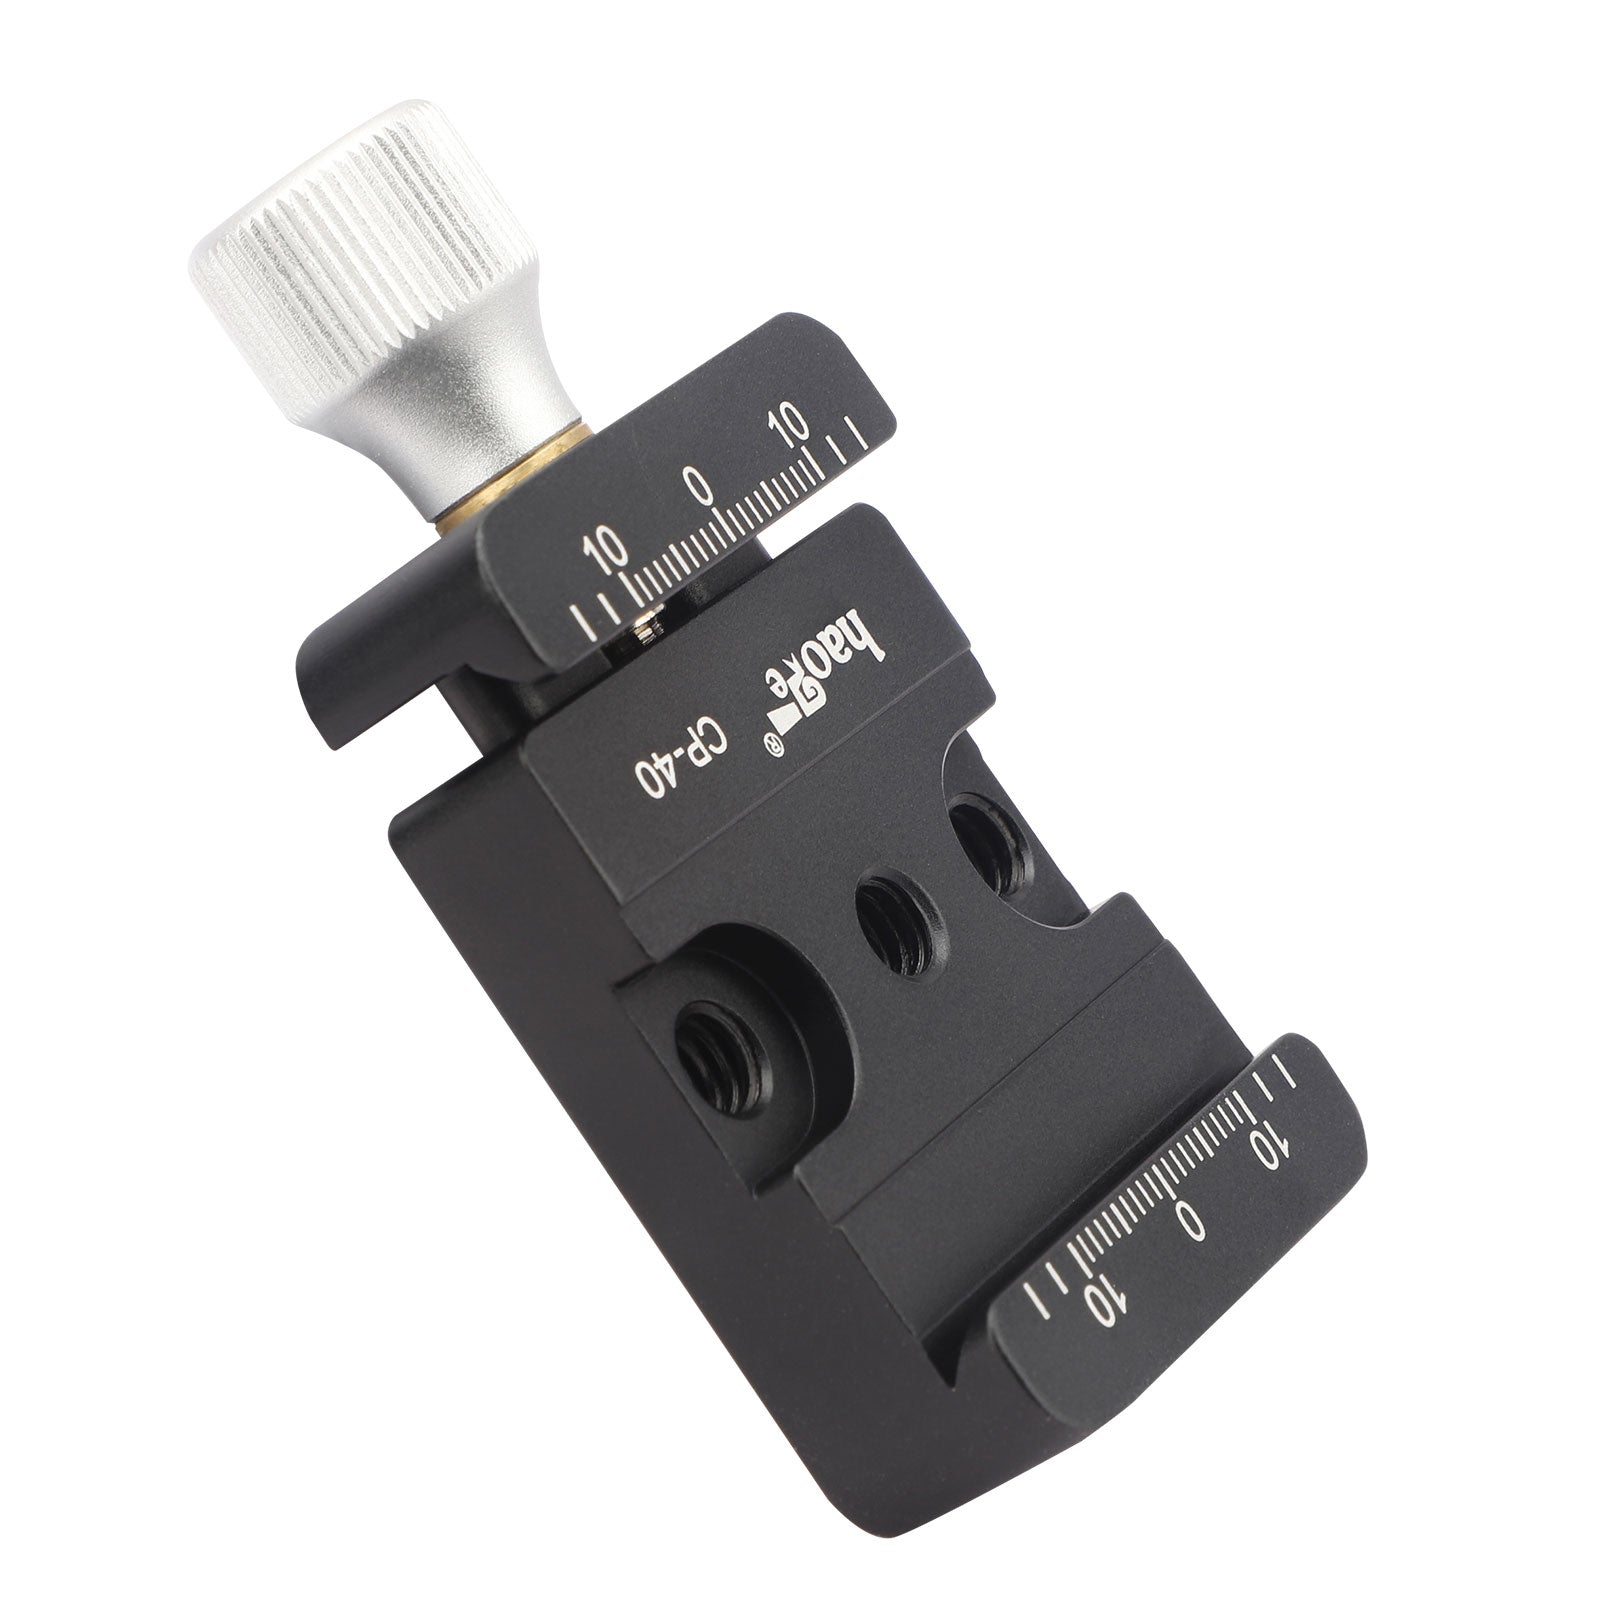 Haoge CP-40 DSLR and Mirrorless Quick Release Clamp for Arca-Type Standard Conversion Heighten riser Compatible with DJI Ronin S/SC ZHIYUN Crane Series Weebill S Gimbal Manfrotto Tripod Ball Head